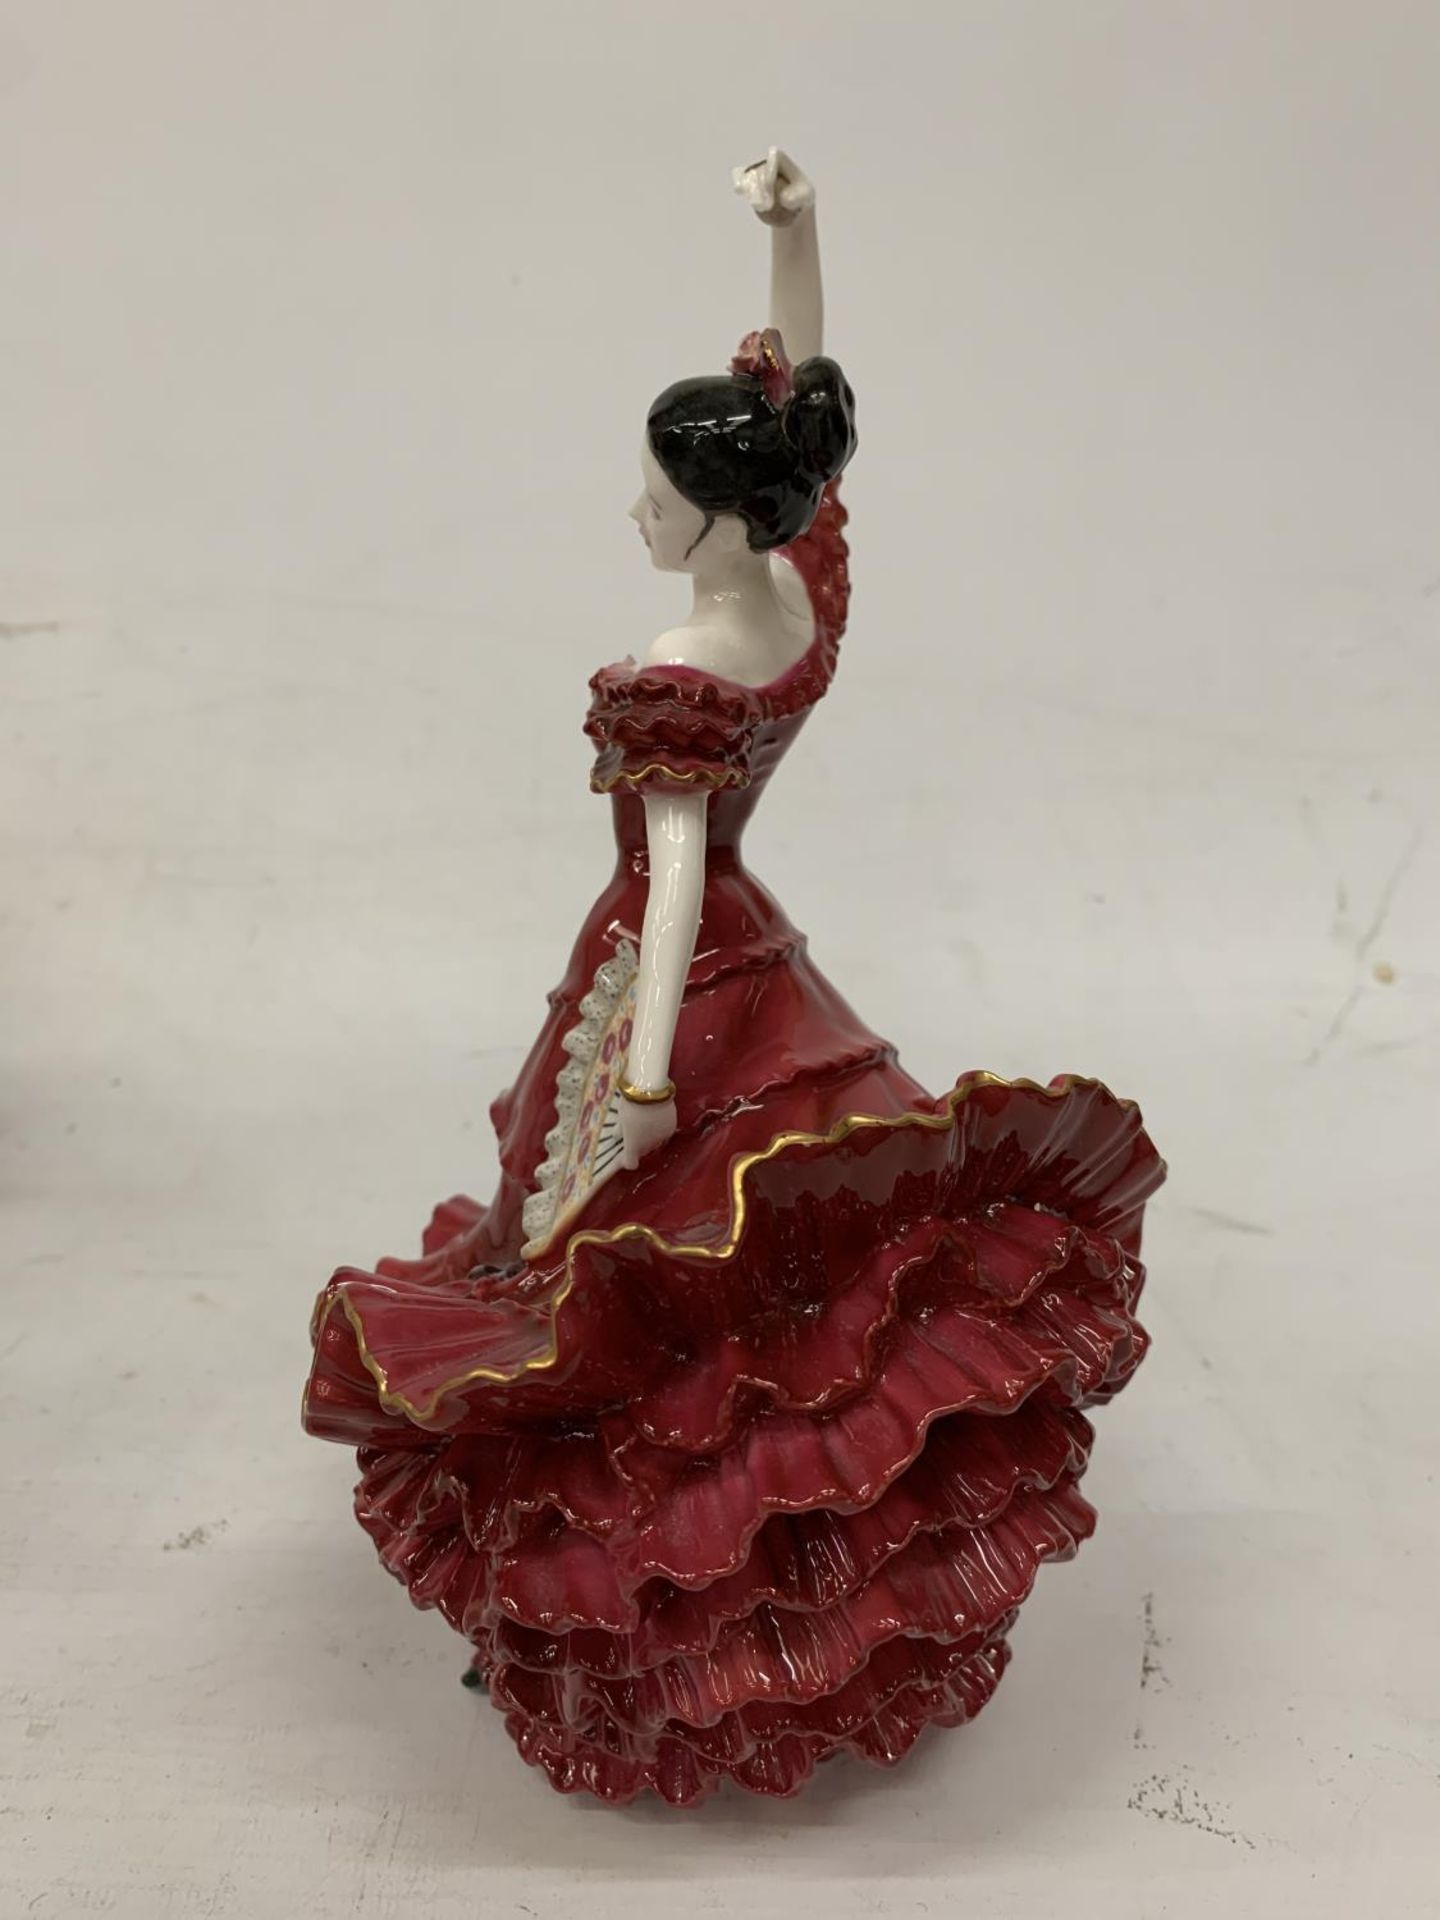 A COALPORT FIGURINE "FLAMENCO" FROM THE COLLECTION A PASSION FOR DANCE ISSUED IN A LIMITED EDITION - Image 4 of 5